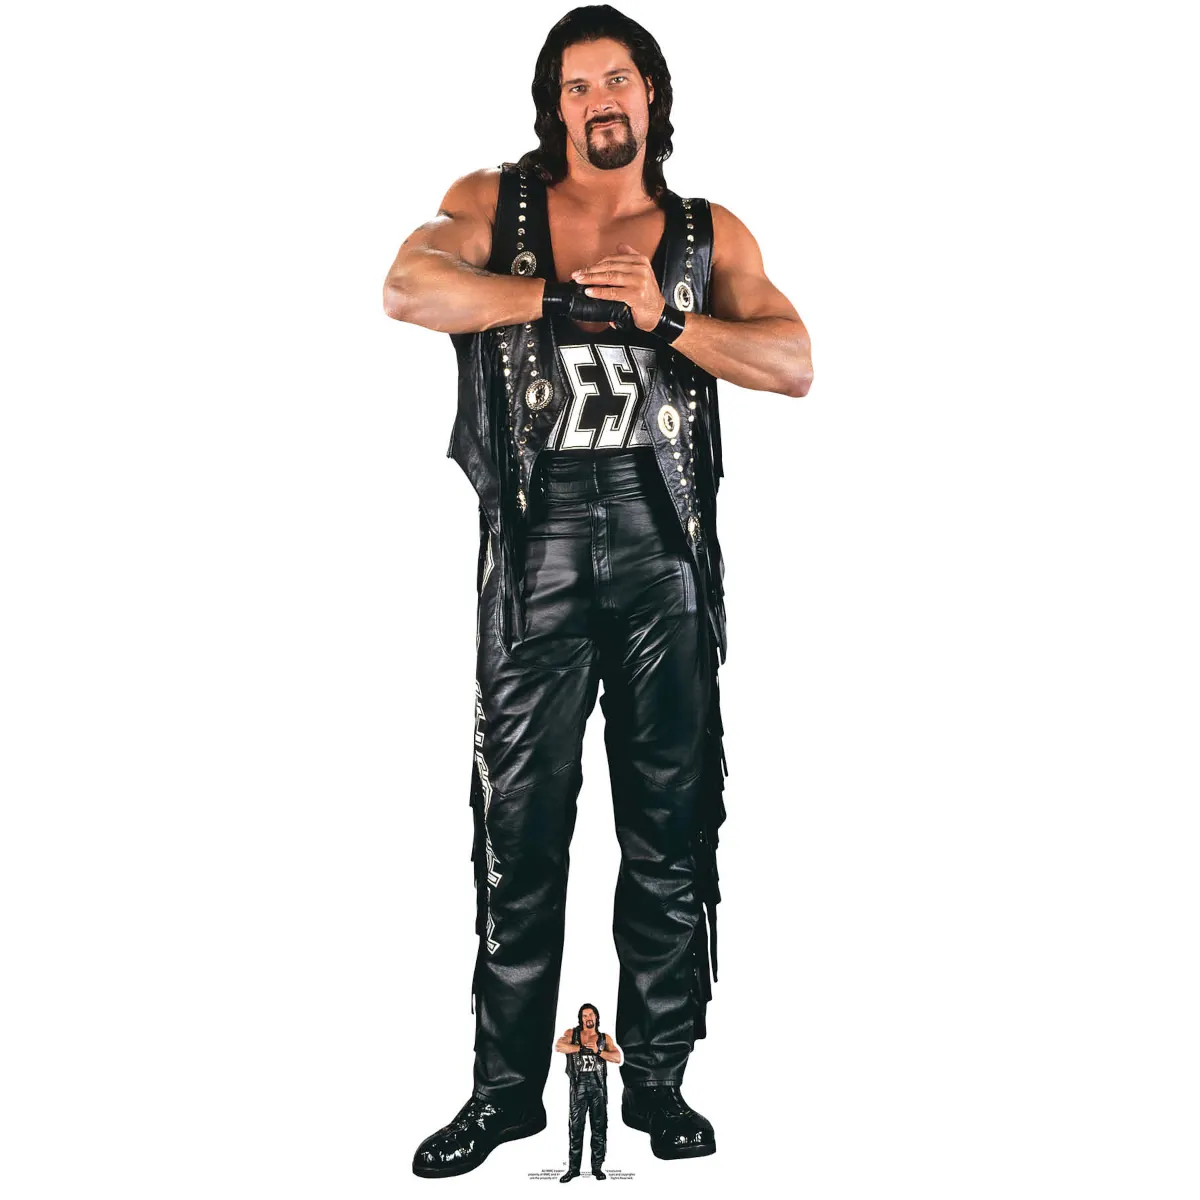 SC4110 Diesel 'Kevin Nash' (WWE) Official Lifesize + Mini Cardboard Cutout Standee Front